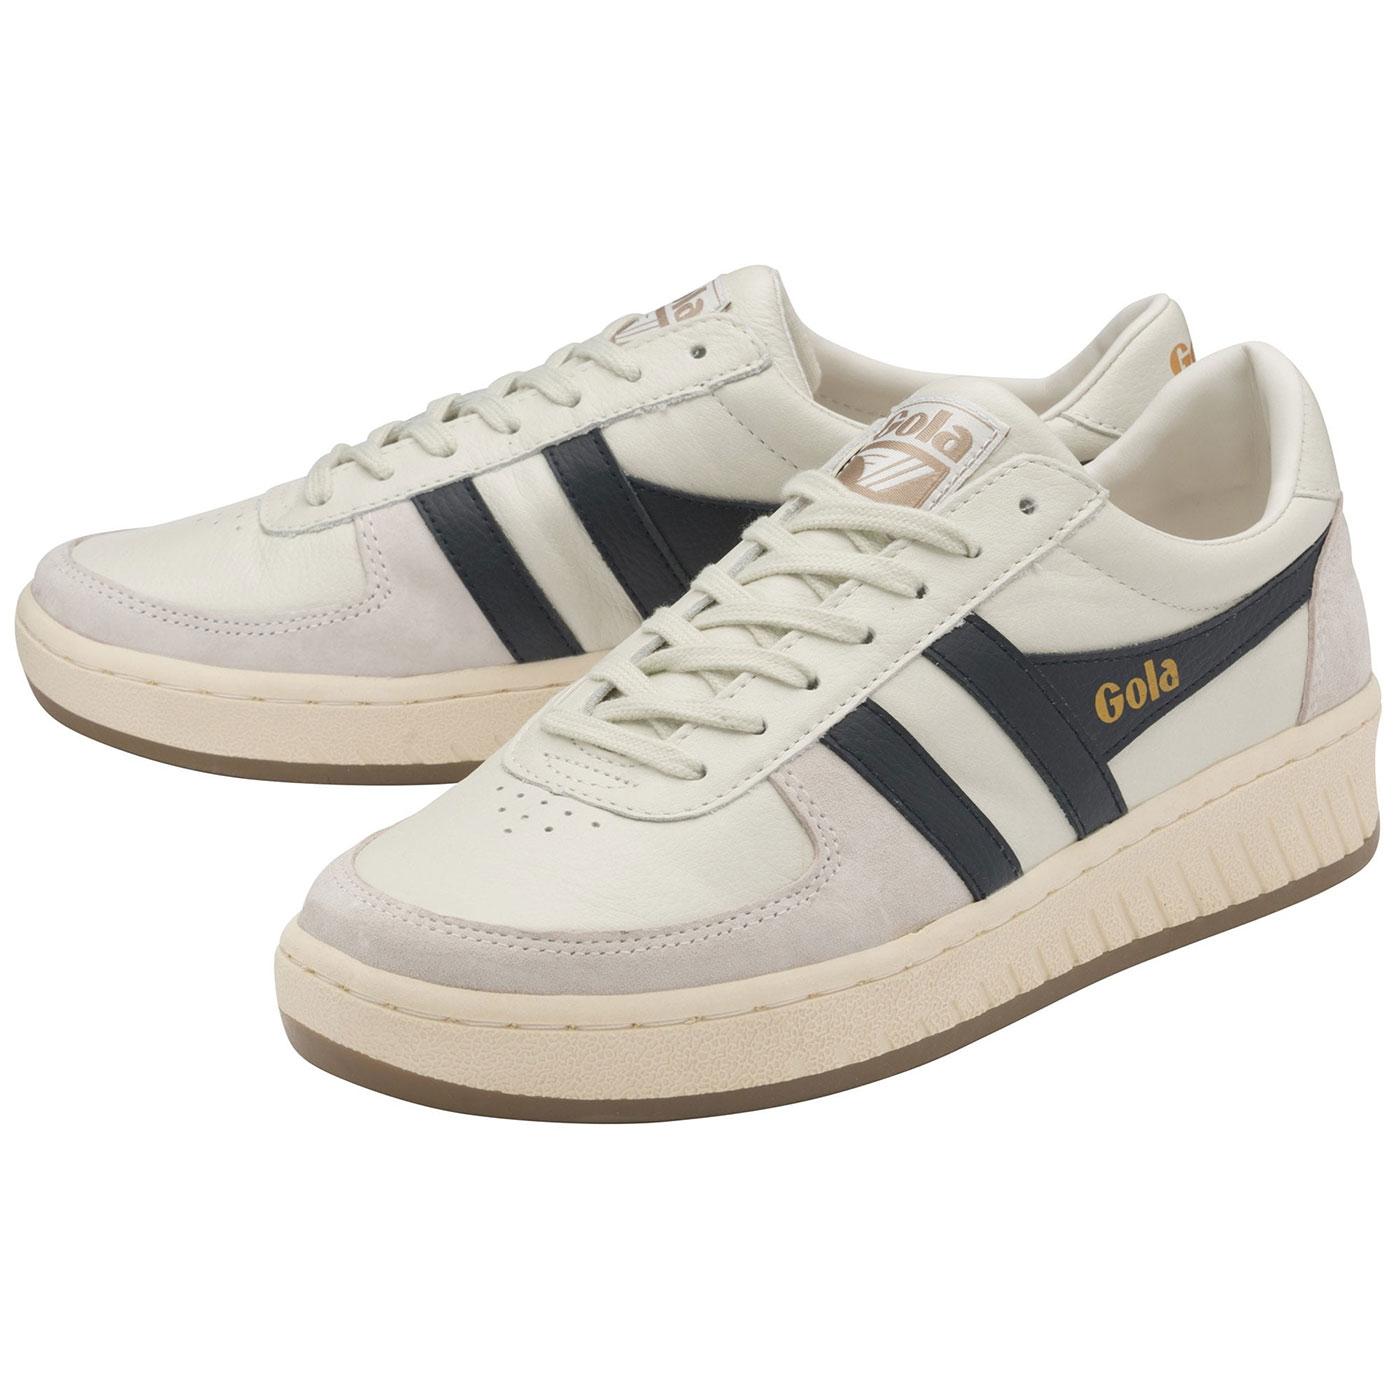 GOLA Grandslam 78 Retro Court Trainers in Off White/Navy